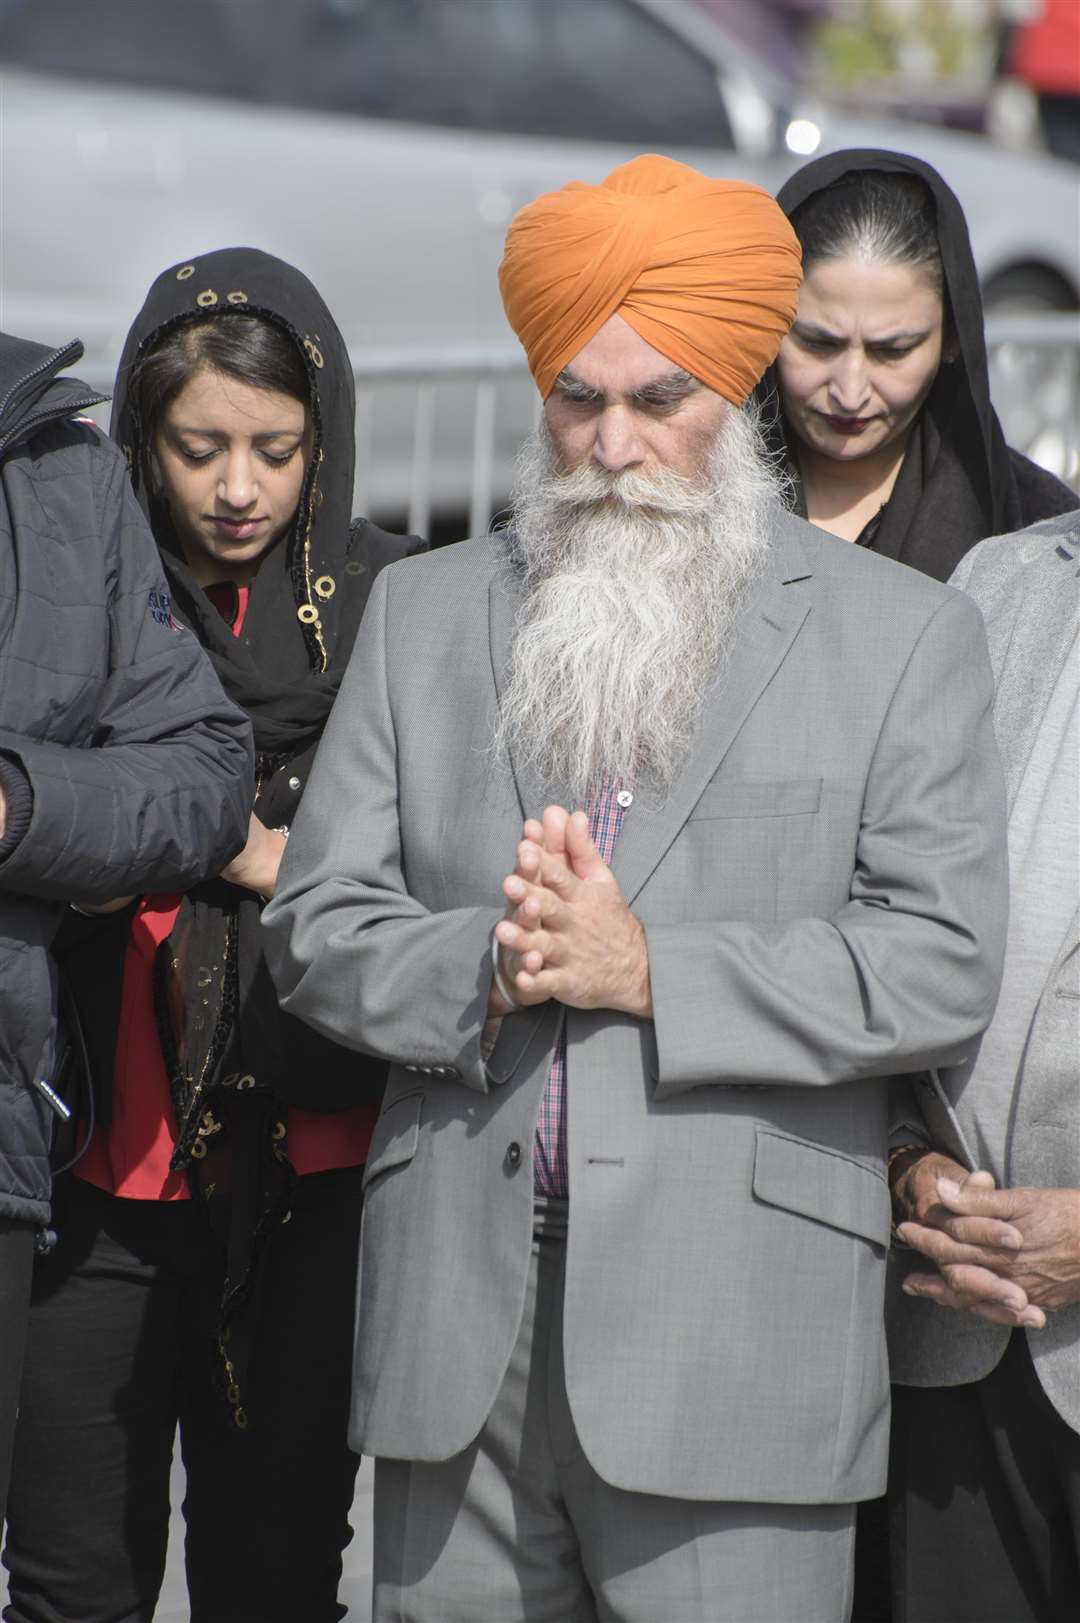 The new president of the Guru Nanak Darbar Gurdwara, Ajaib Singh Cheema. The raising of the Sikh flag to celebrate the beginning of the Festival of Vaisakhi, an important date in Sikhism, at the Community Square, Gravesend..Picture: Andy Payton. (7439526)